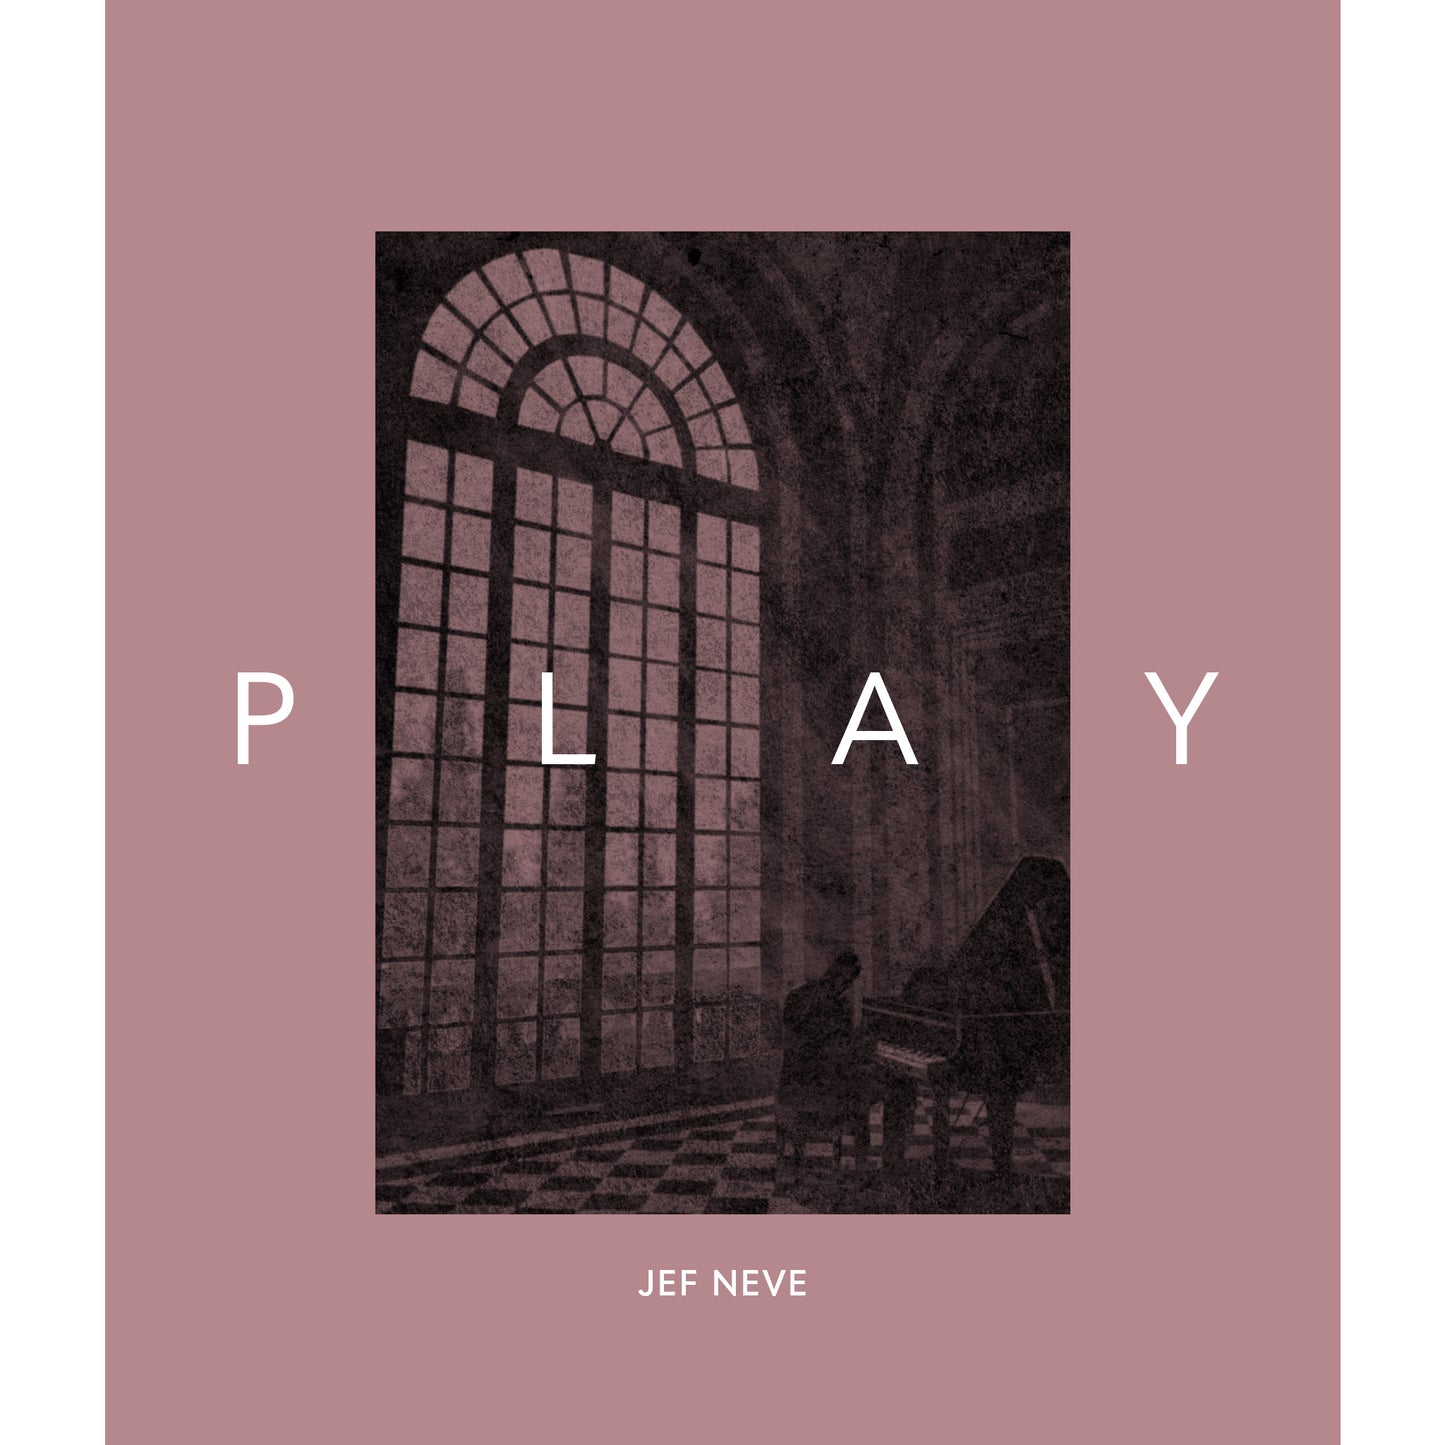 Book 3: PLAY